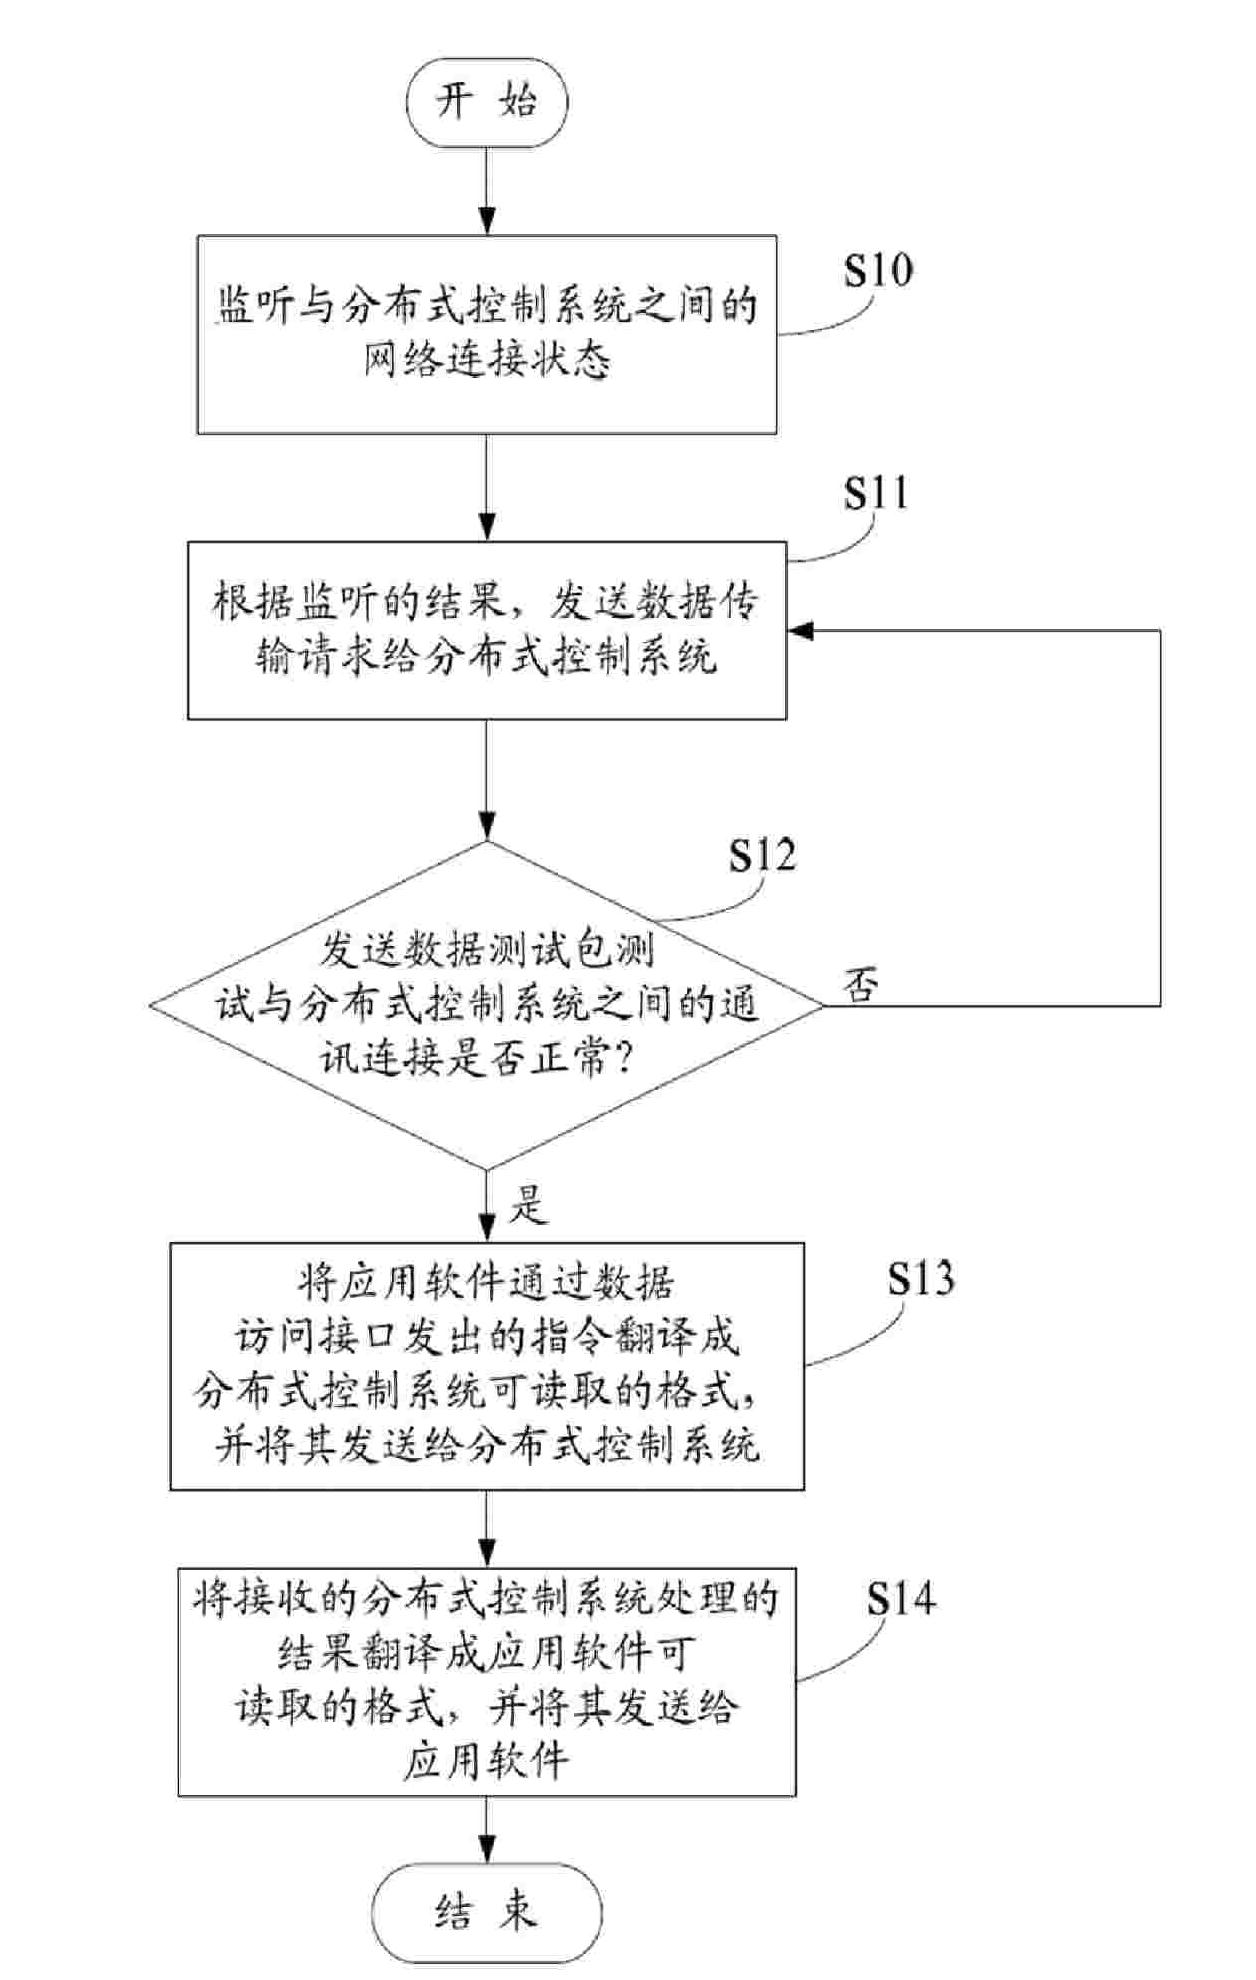 System and method for data communication between application software and distributed control system